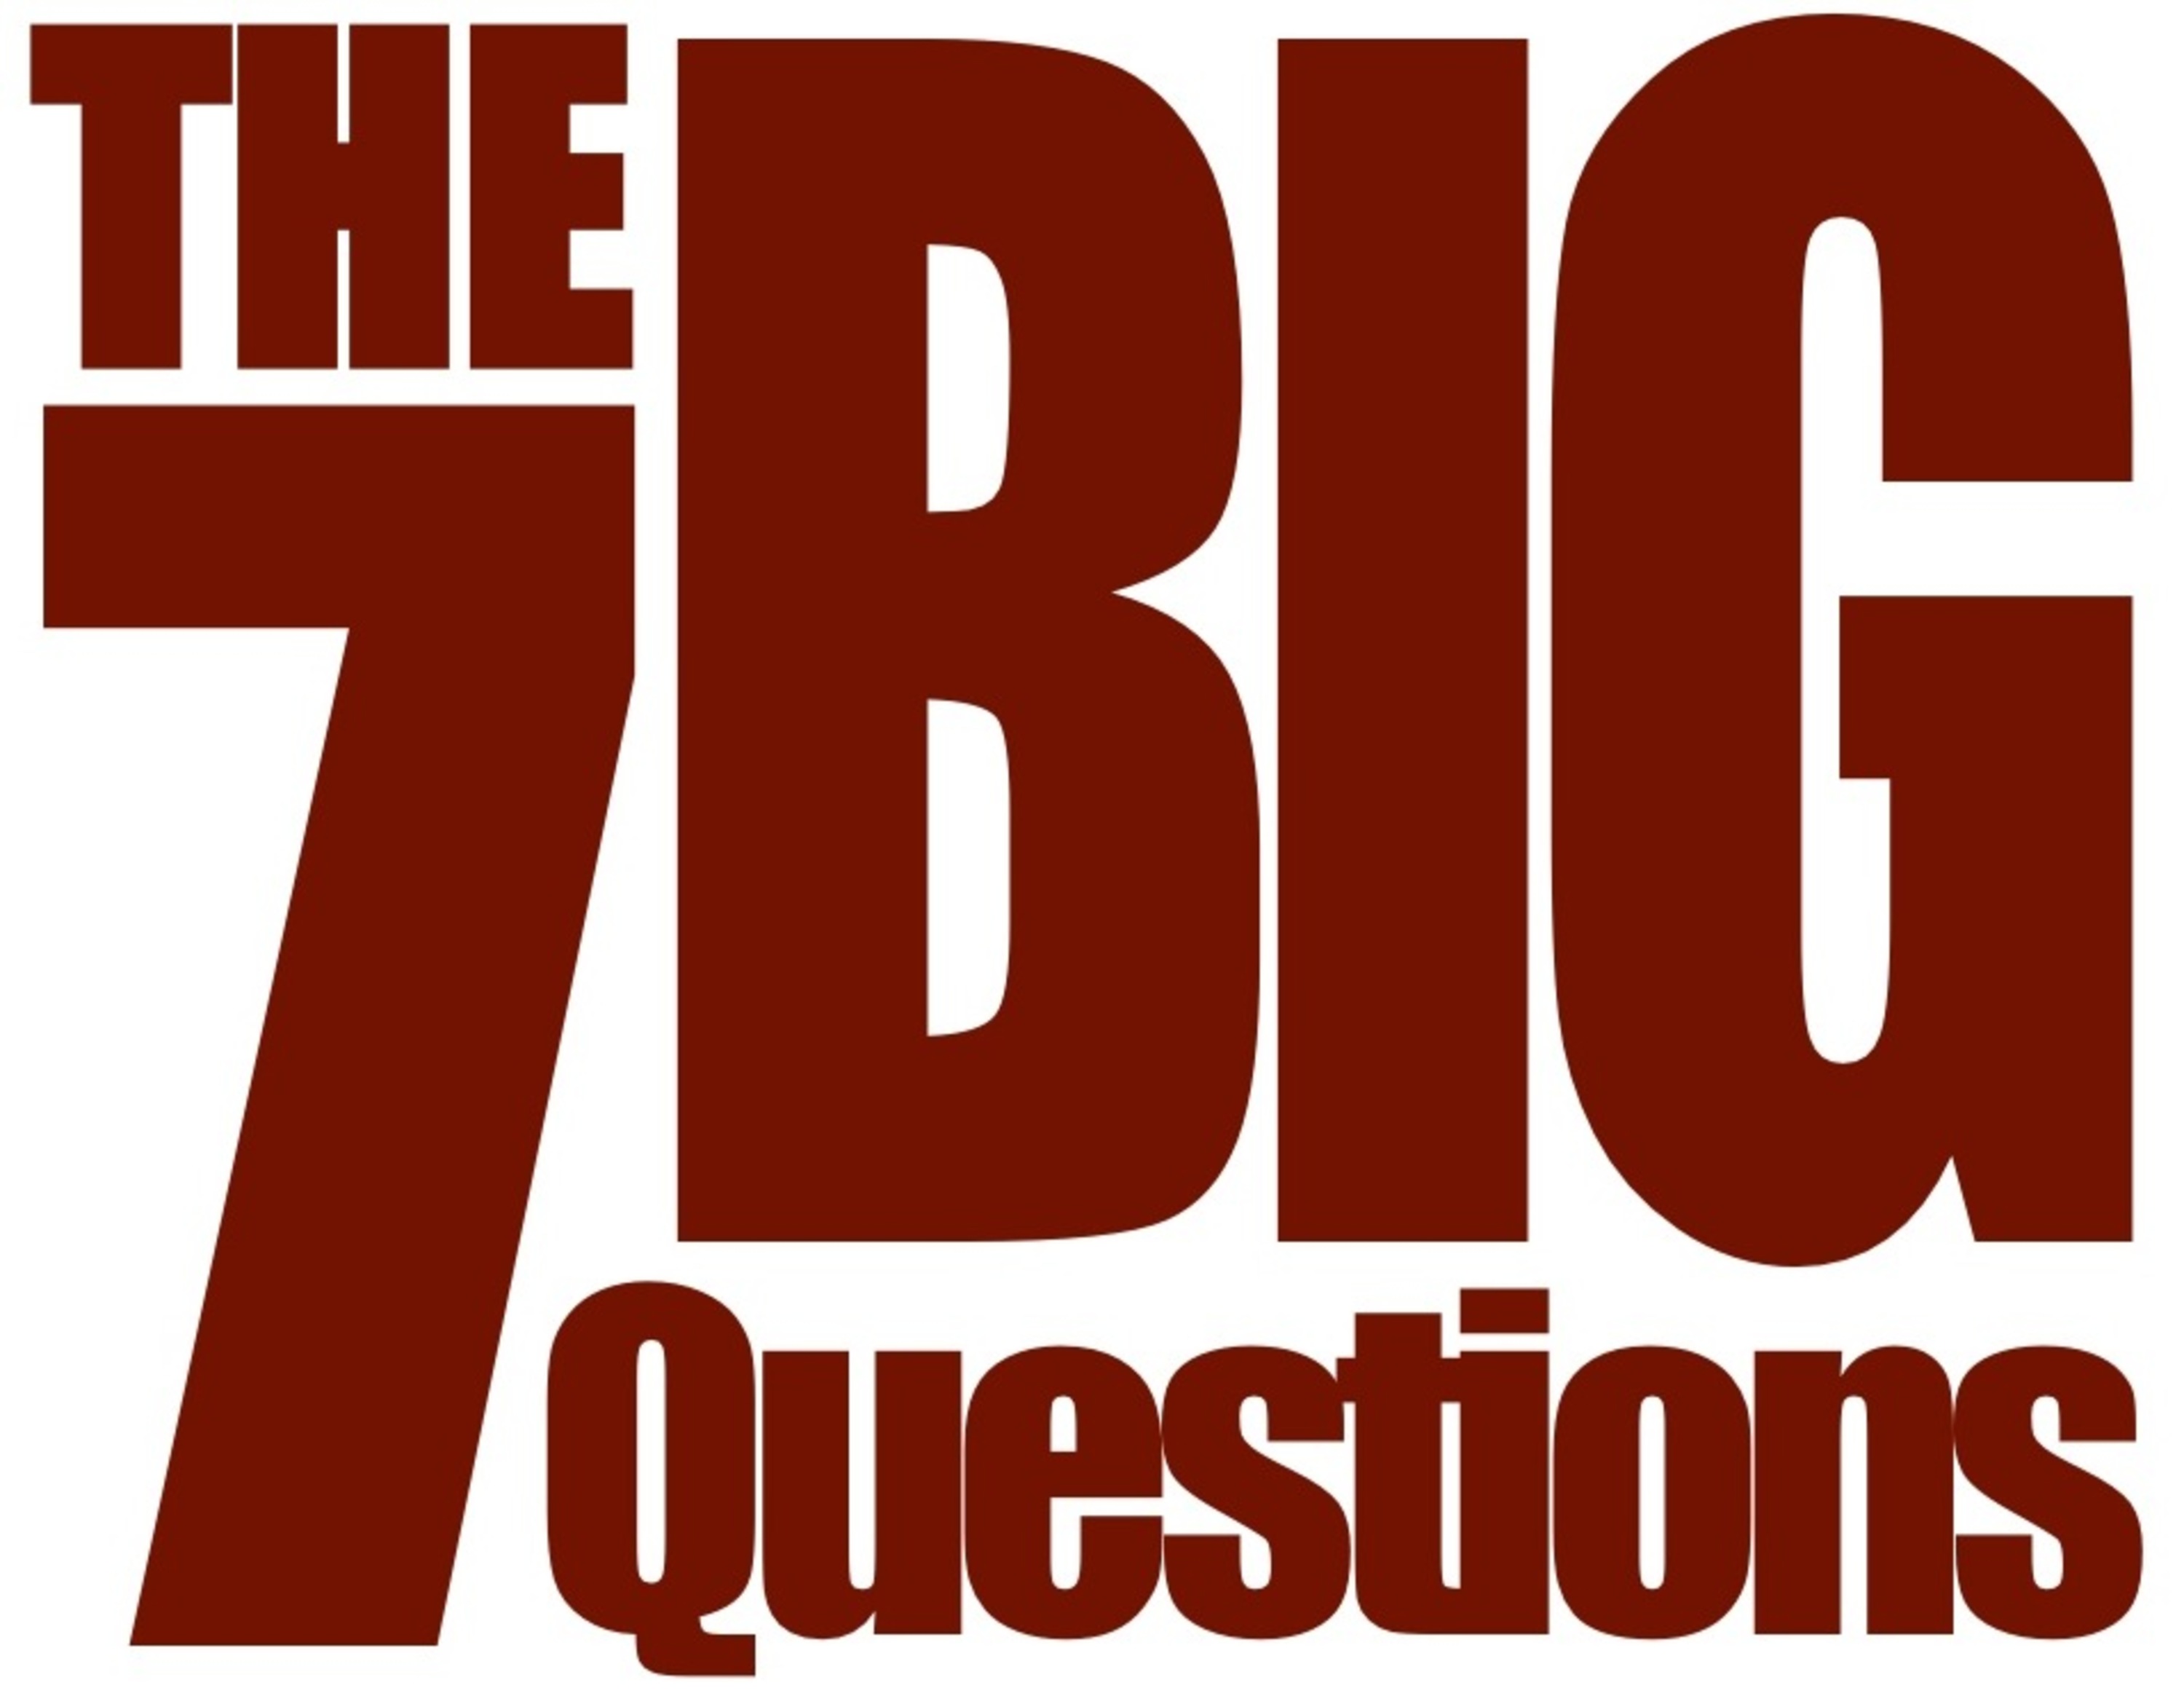 ...creating YOUR 7 Big Questions to get YOUR answers that YOU NEED to create the life YOU want.